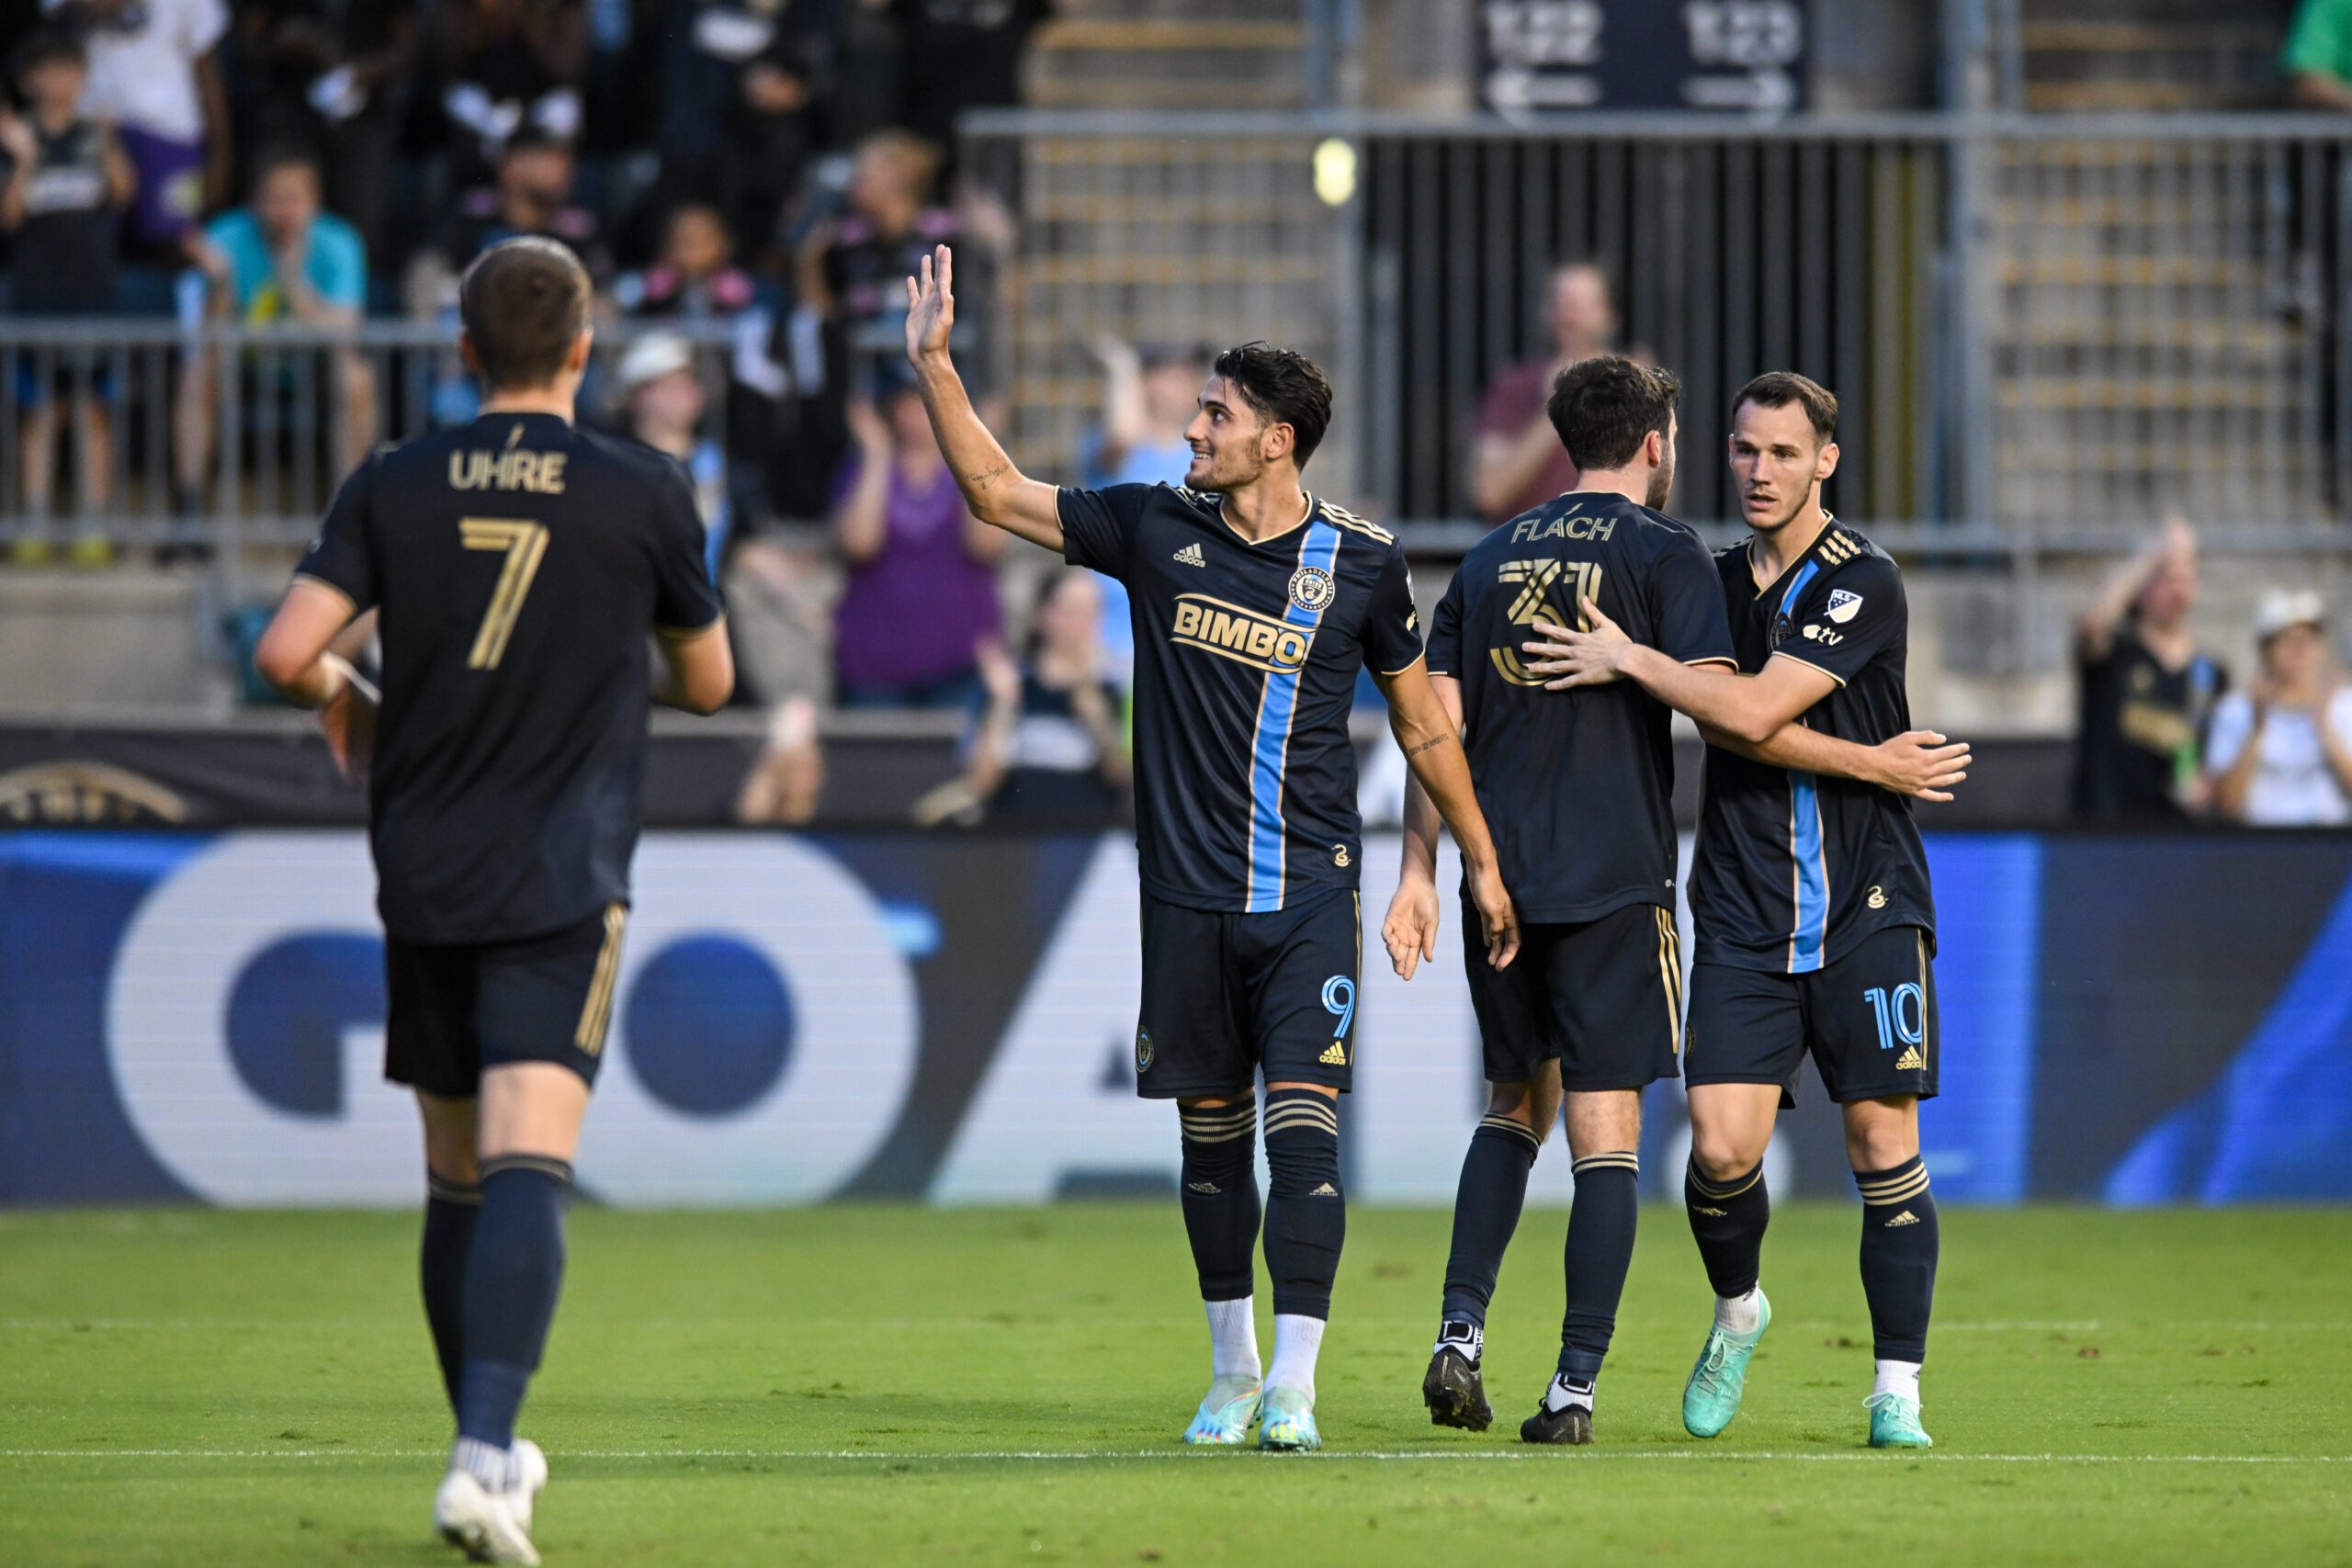 Daily Links: Union continue hot streak with Miami win